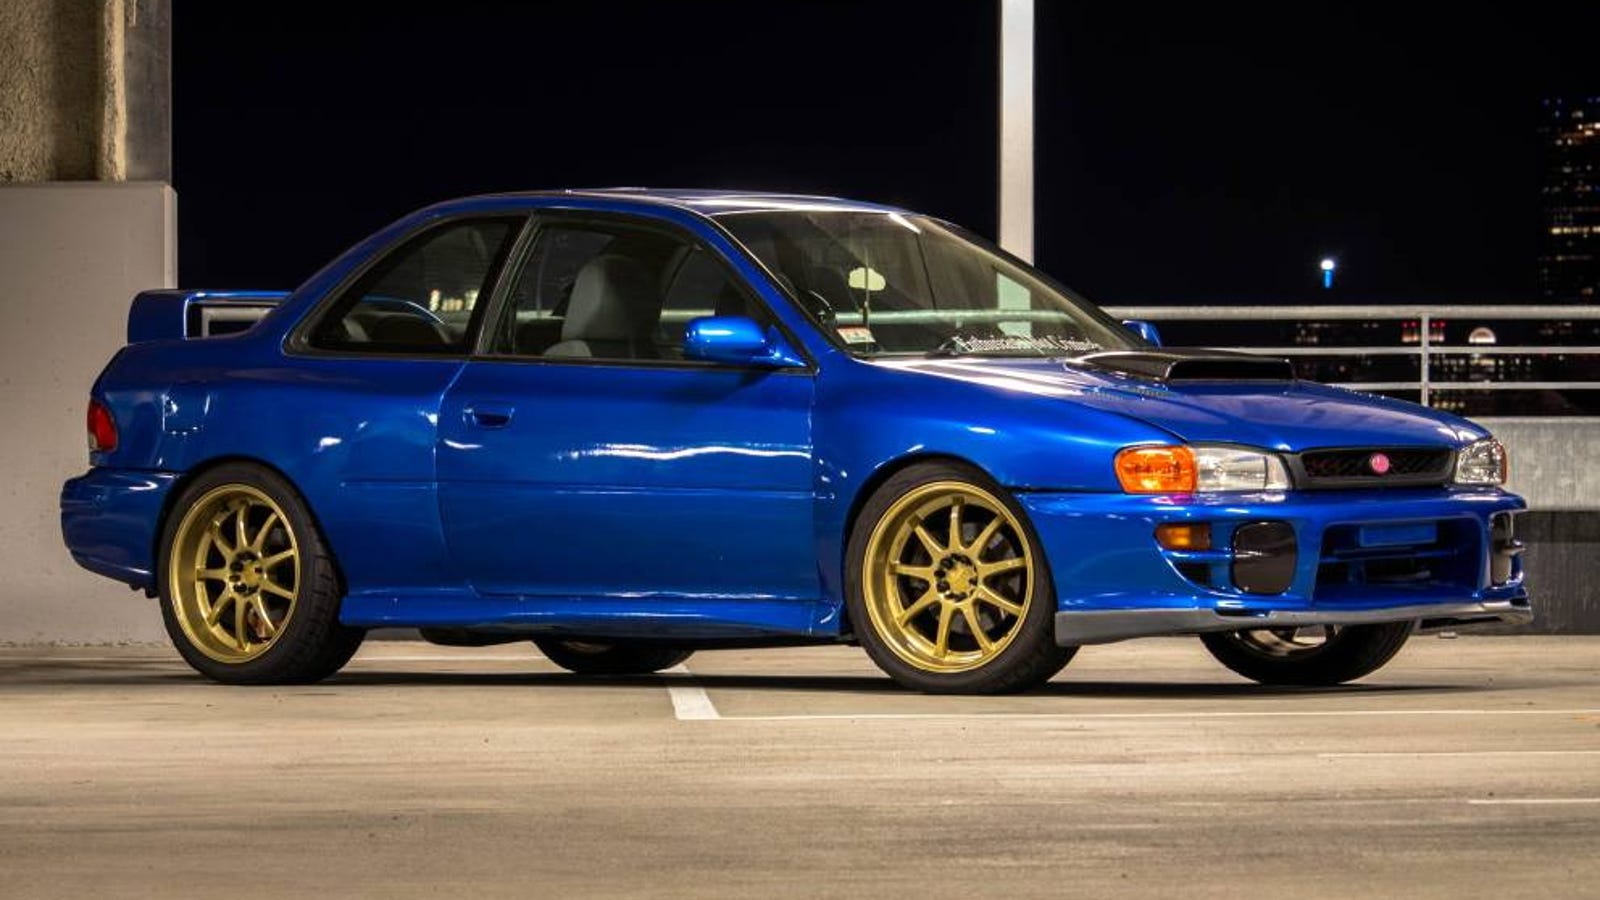 For 8,000, Could This 1999 Subaru Impreza RS Be Your